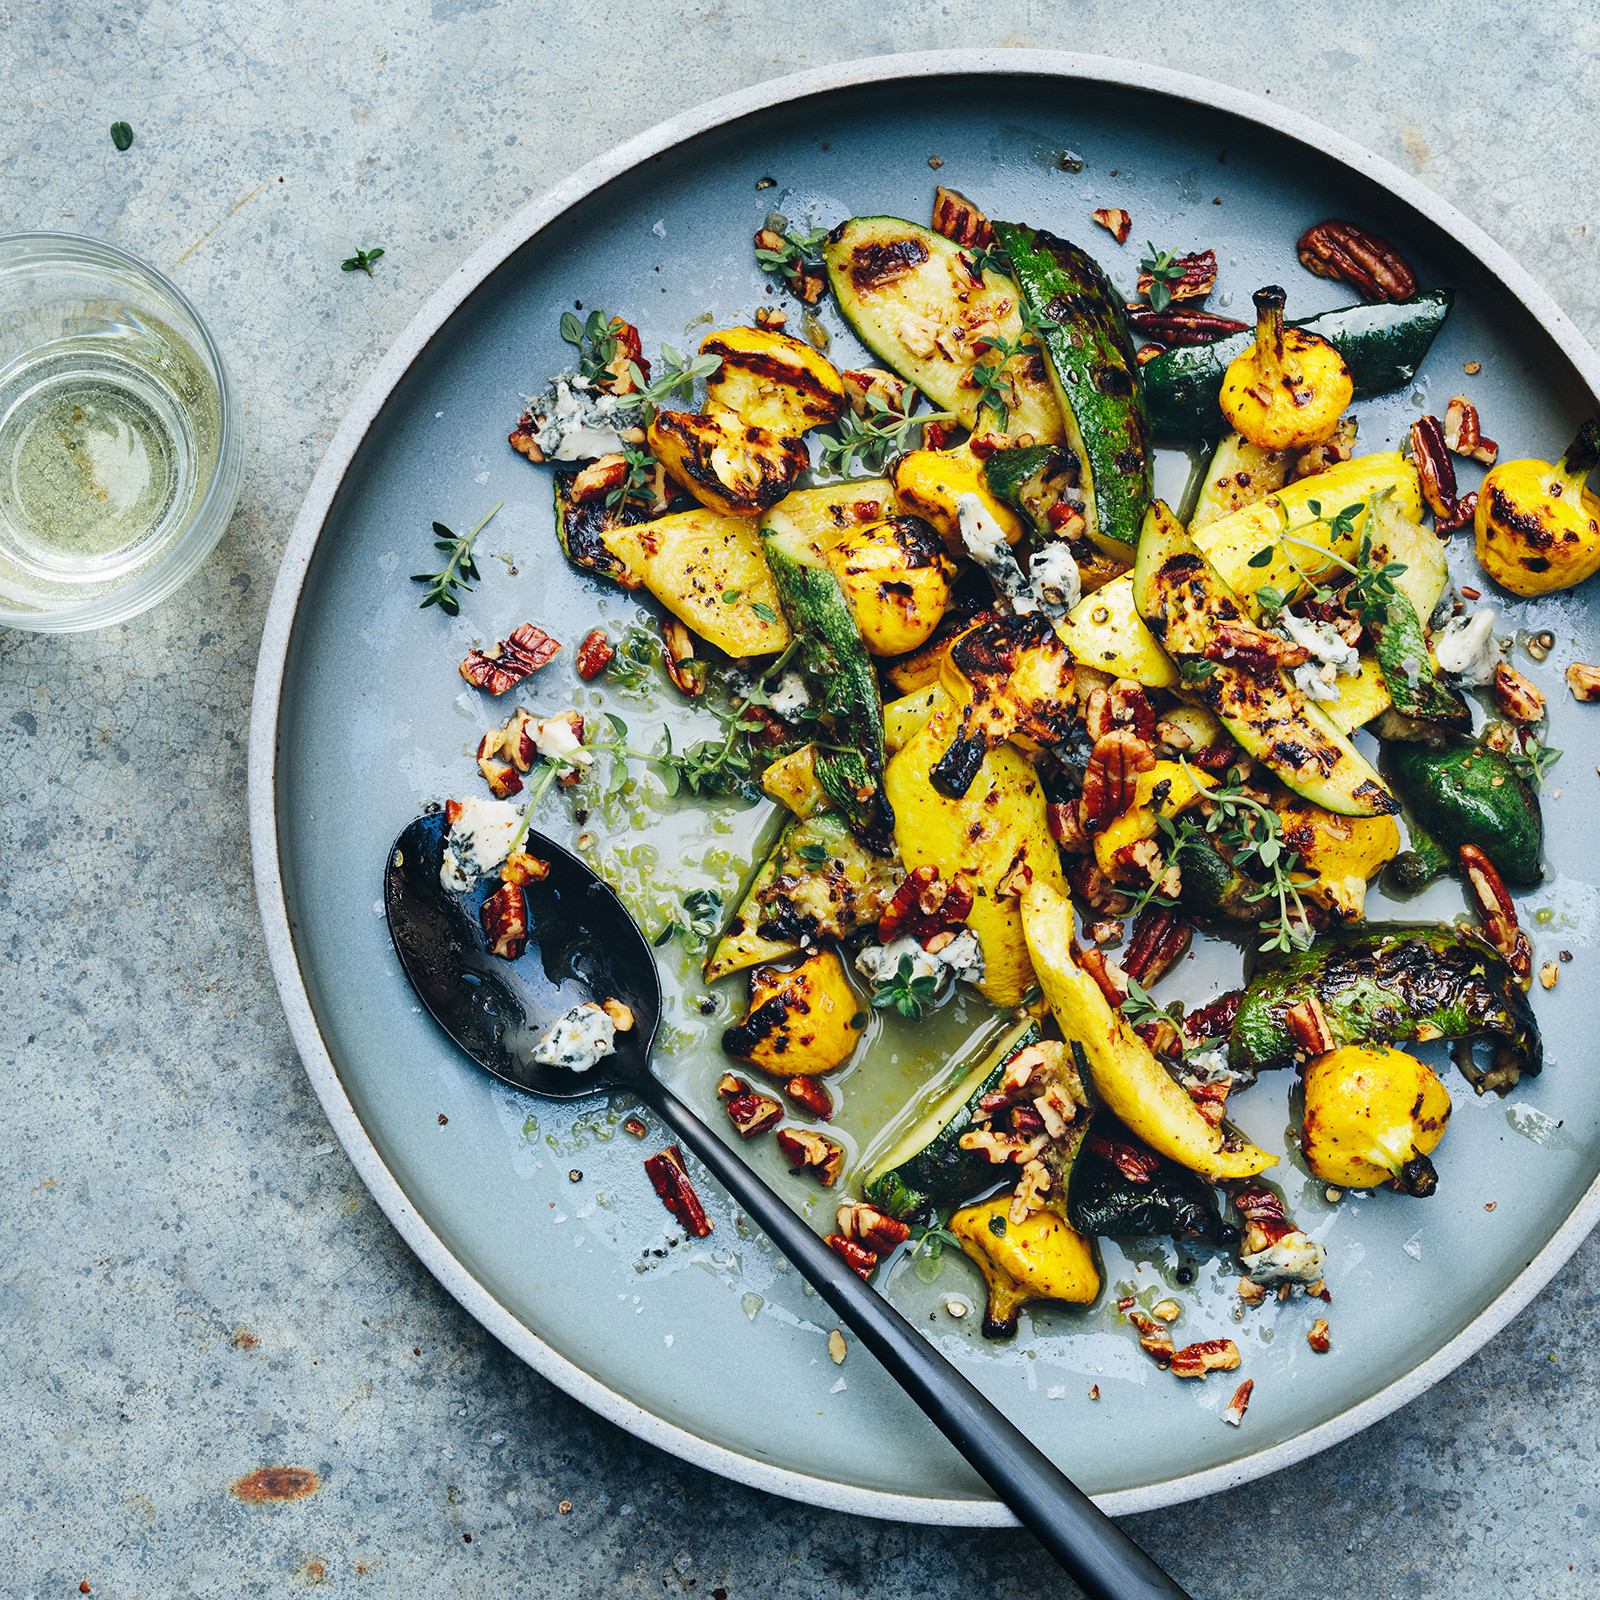 Grilled Summer Squash
 Grilled Summer Squash with Blue Cheese and Pecans Recipe